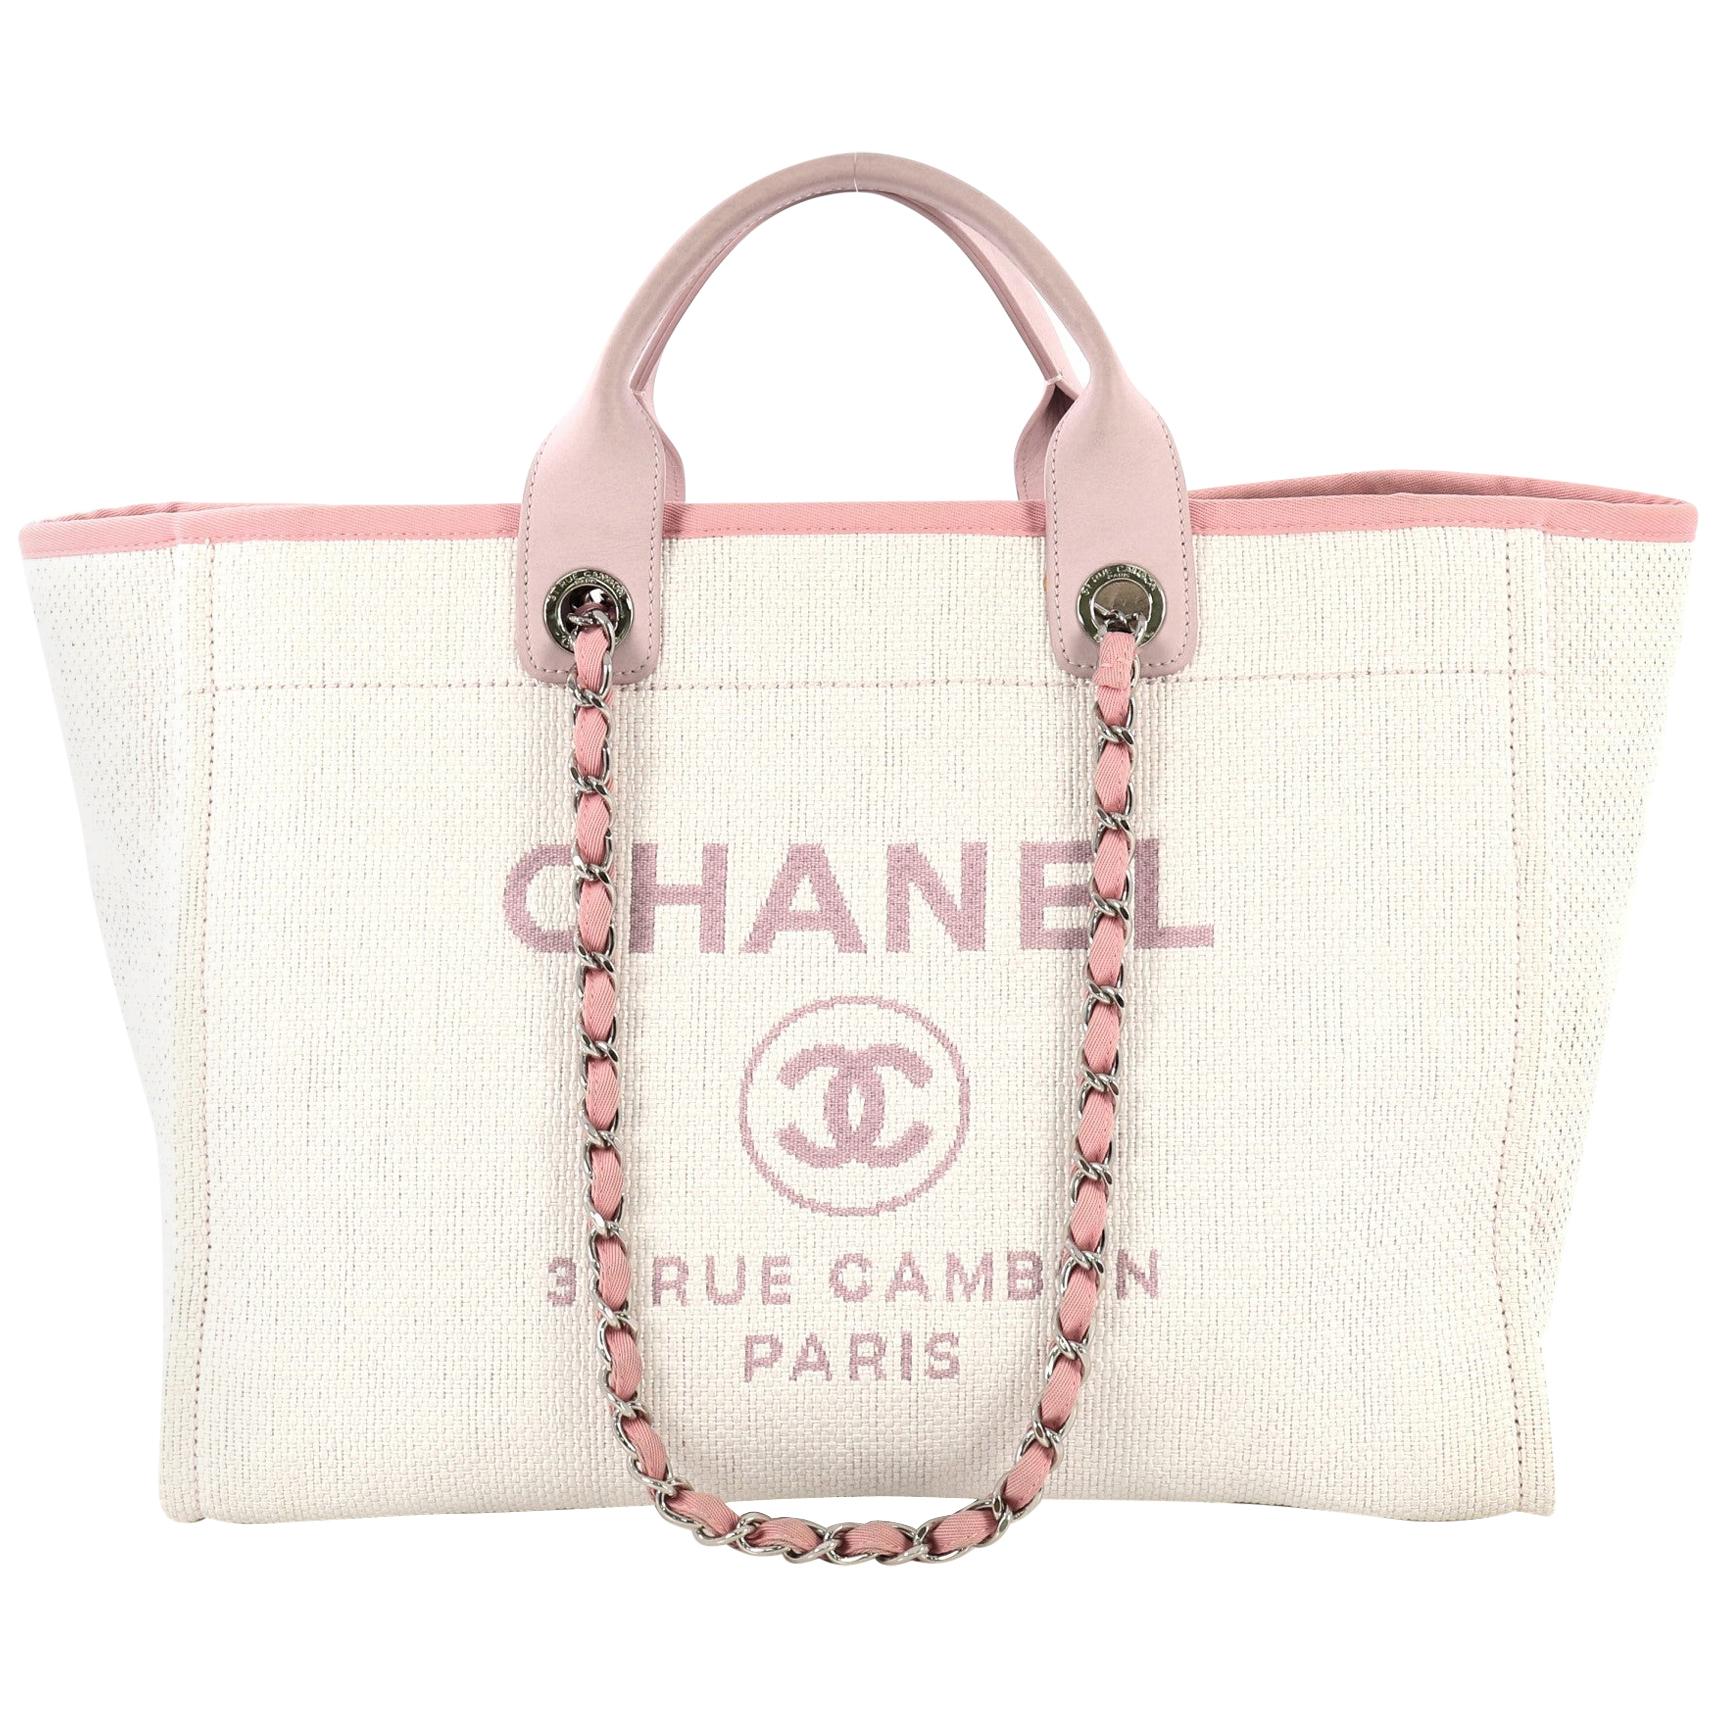 CHANEL Deauville Large Raffia Shopping Tote Bag Pink